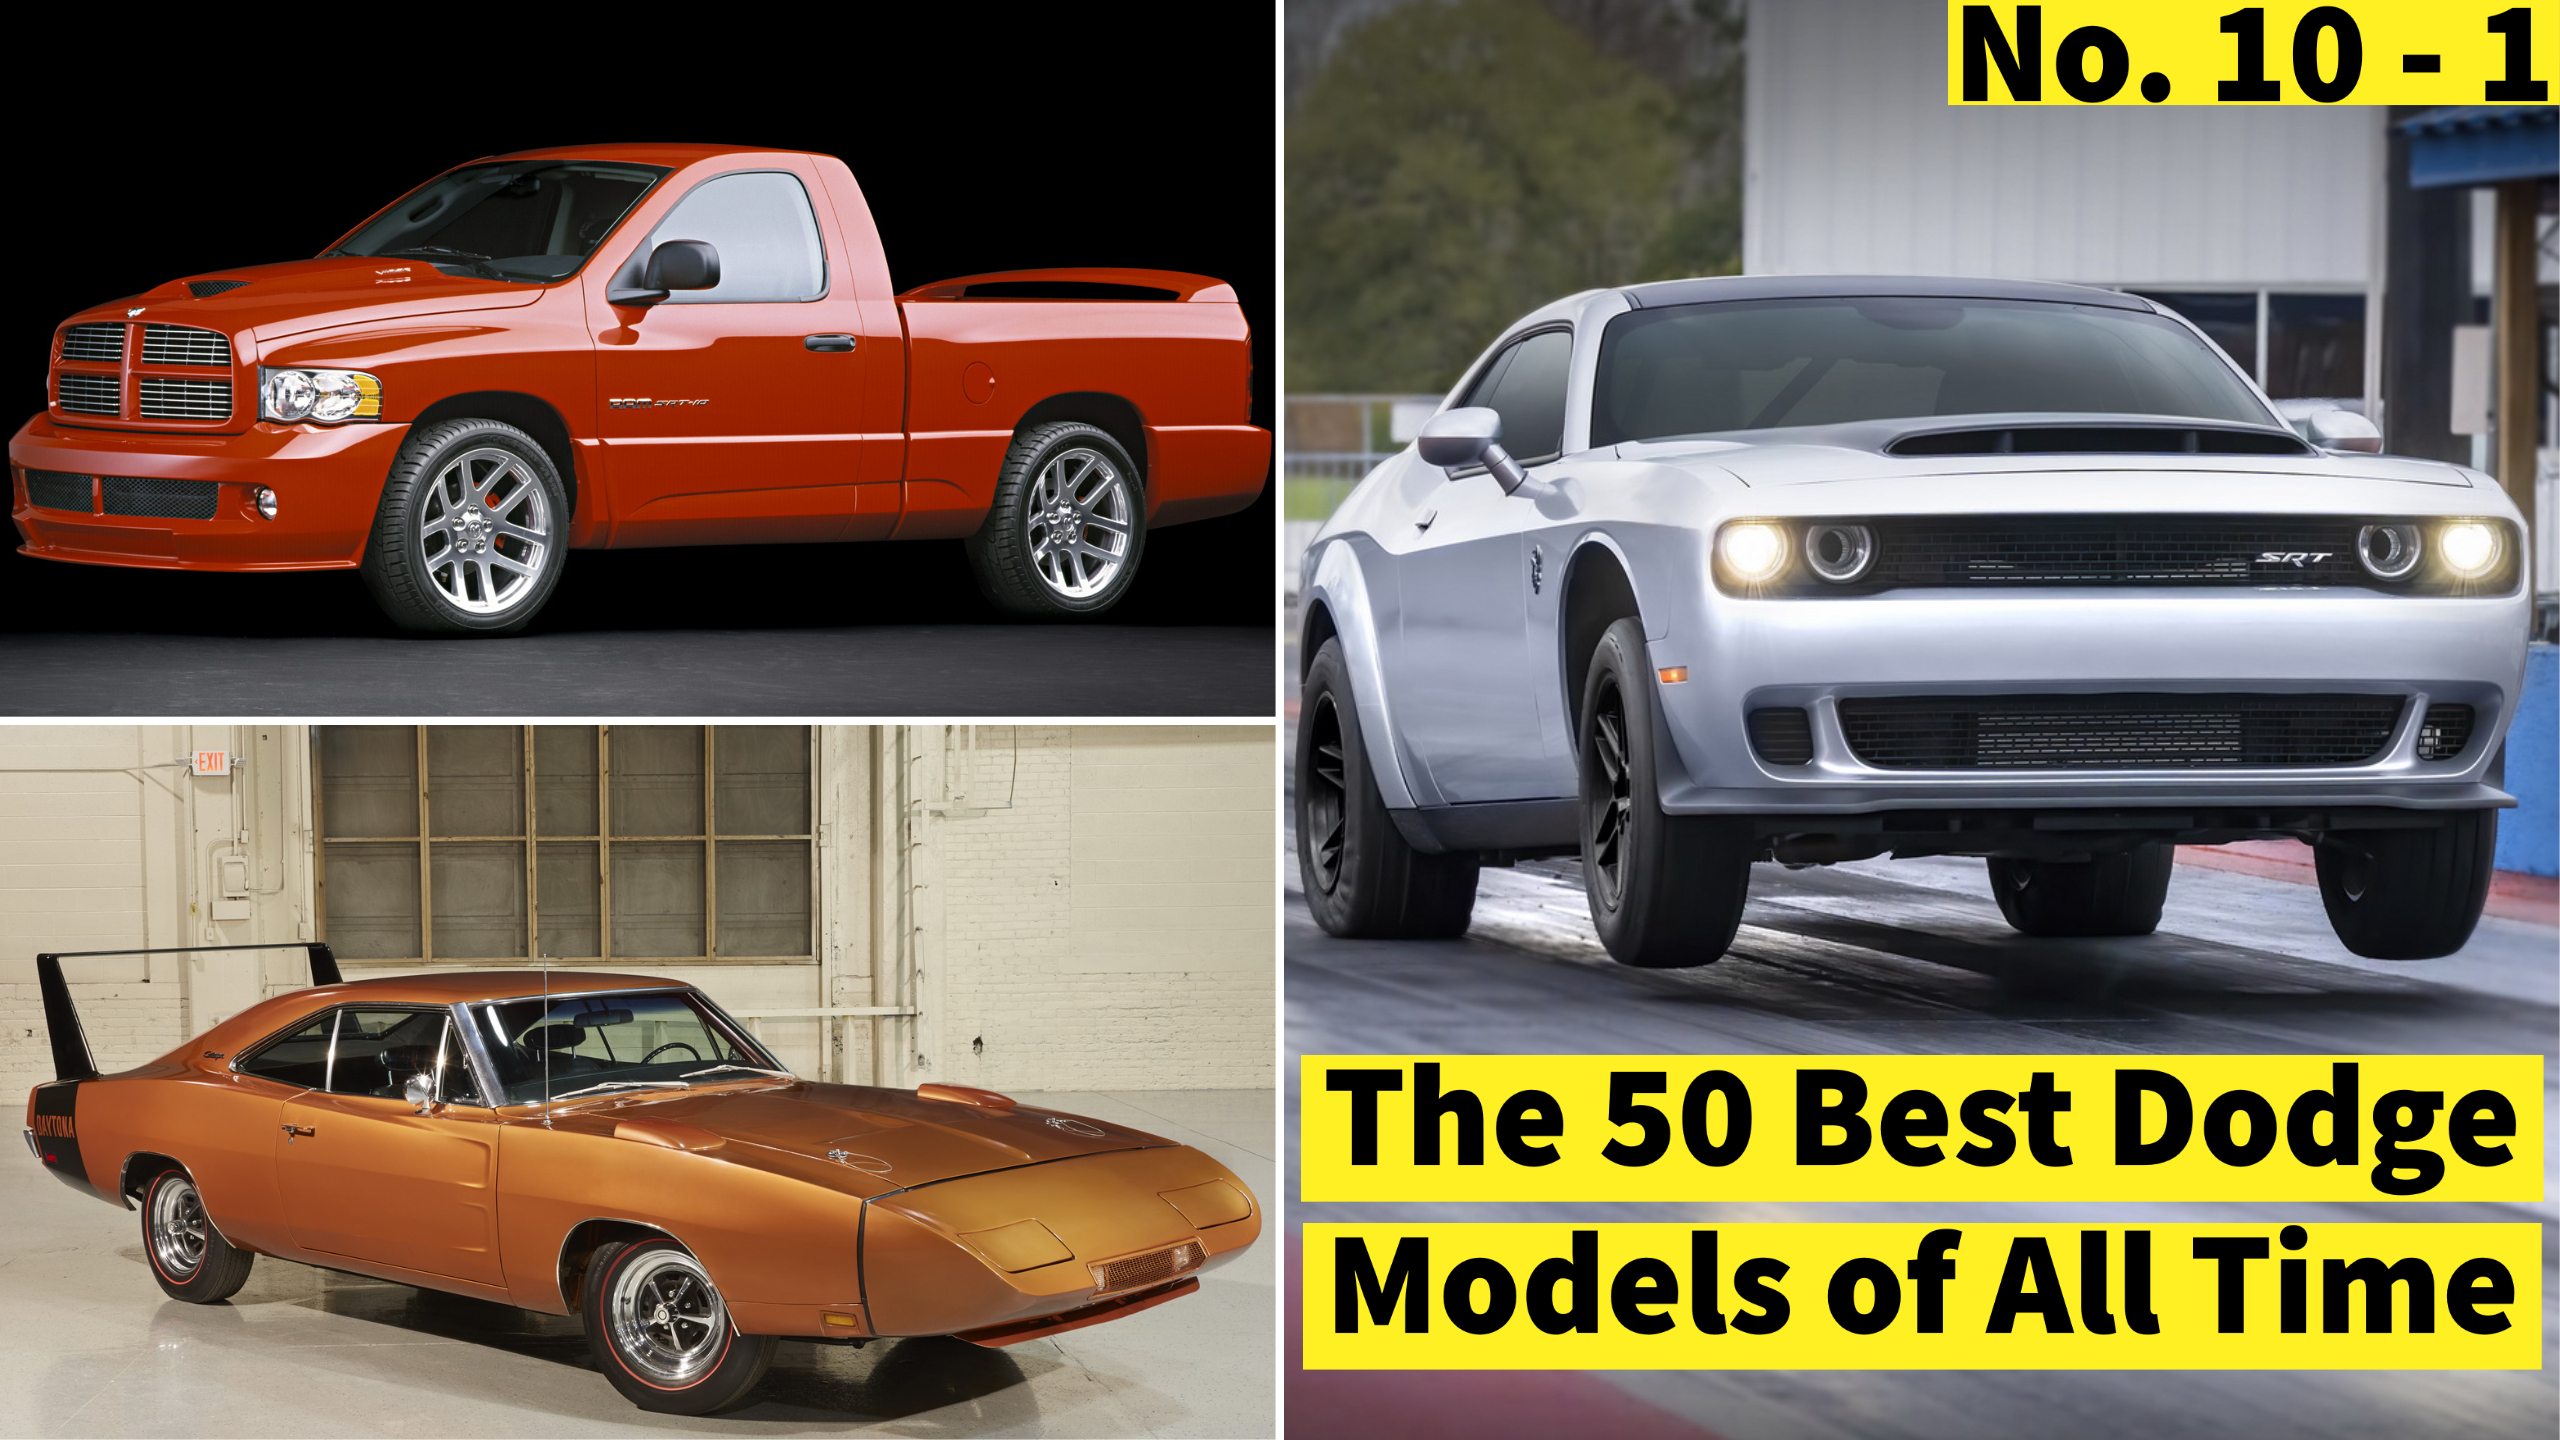 The 50 Best Dodge Models of All Time (No. 10 – 1) - autoevolution